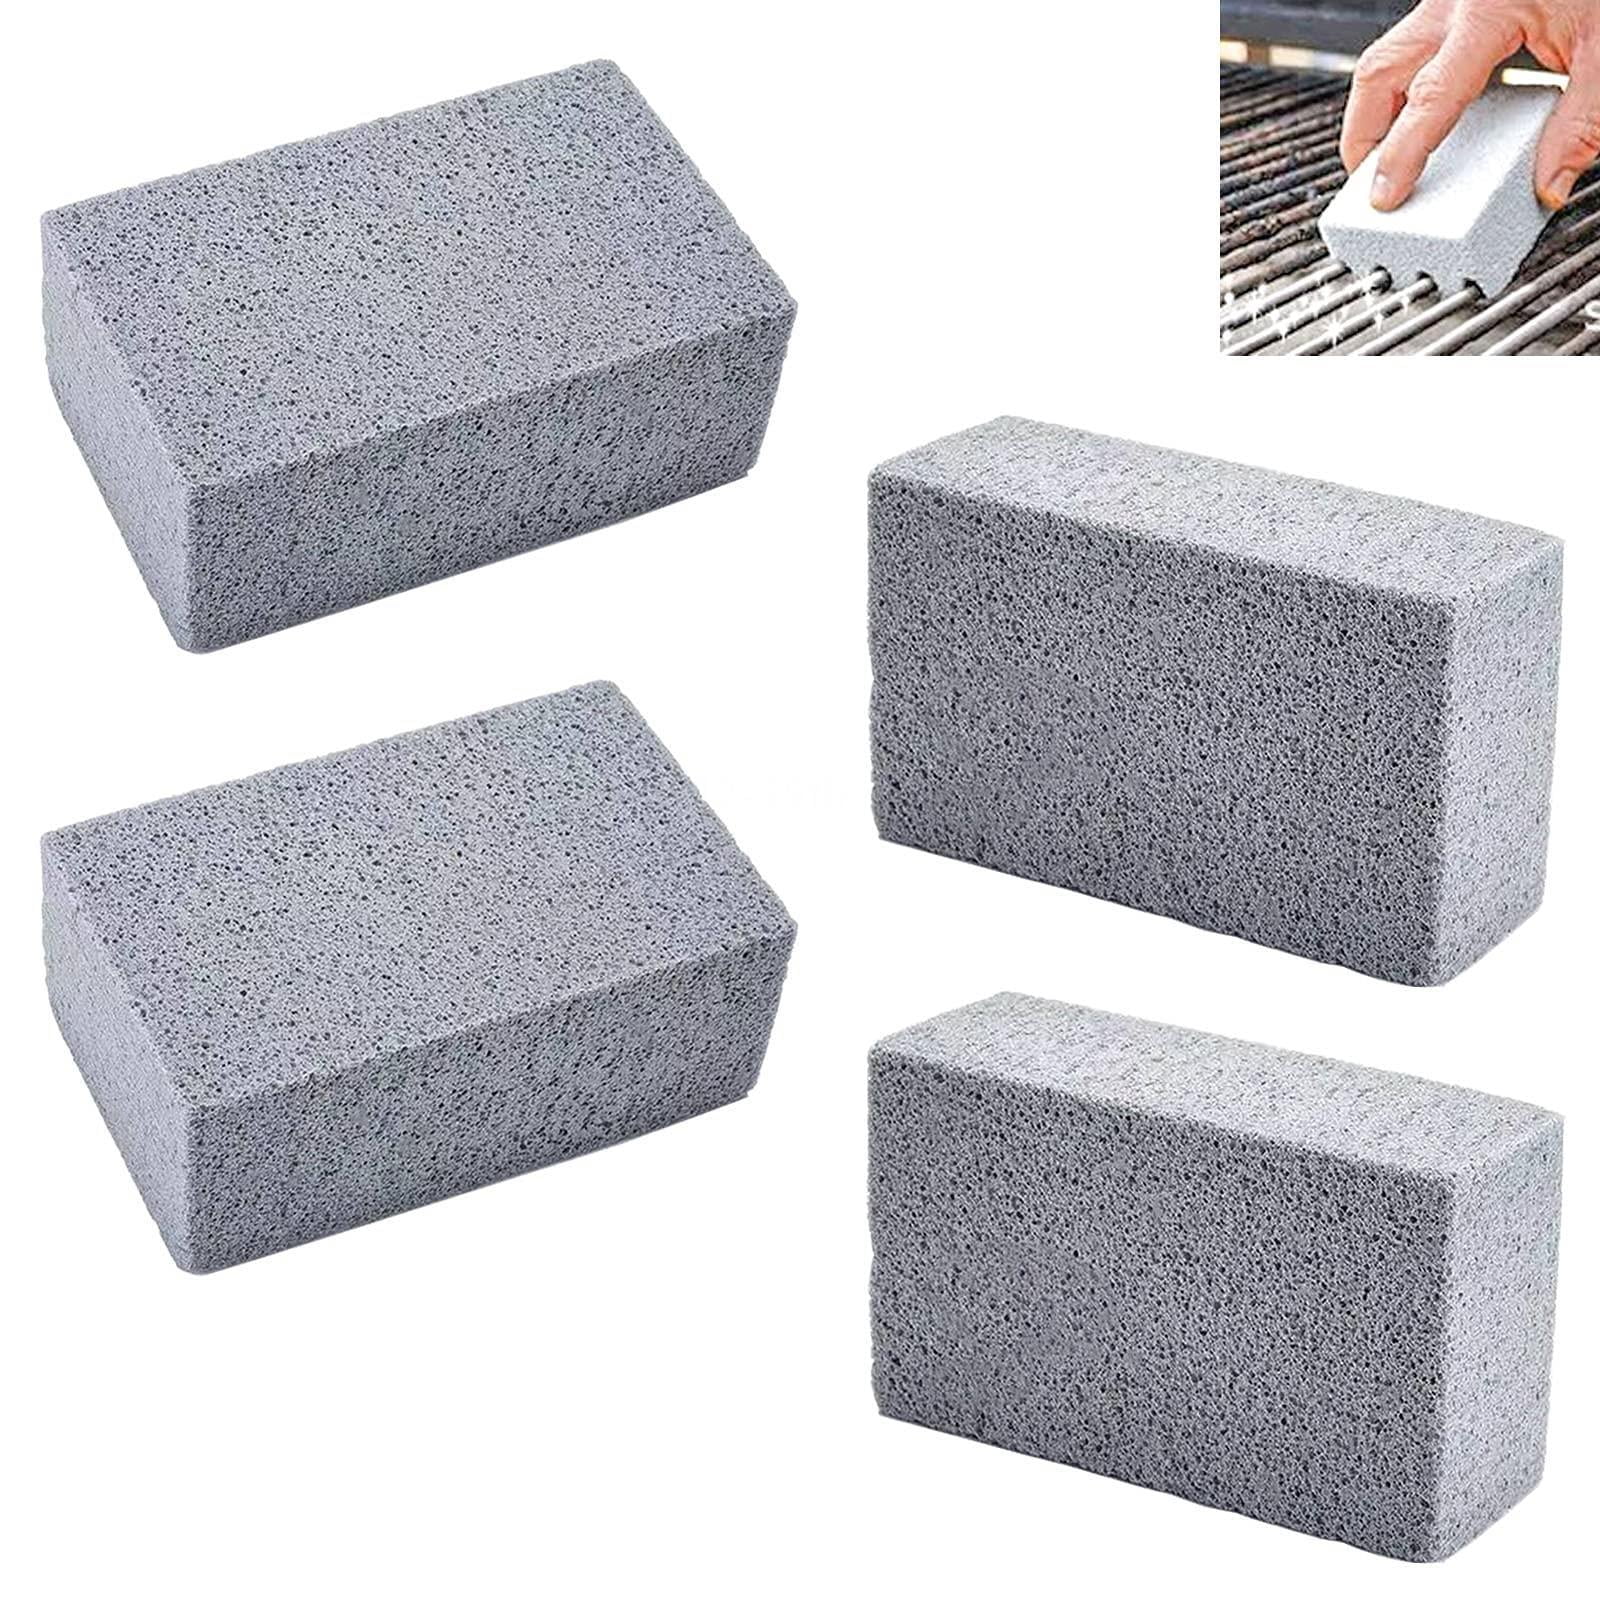 Details about   BBQ Scraper Pumice Grill Cleaning Stone Brick Block Barbecue Griddle Kit` 